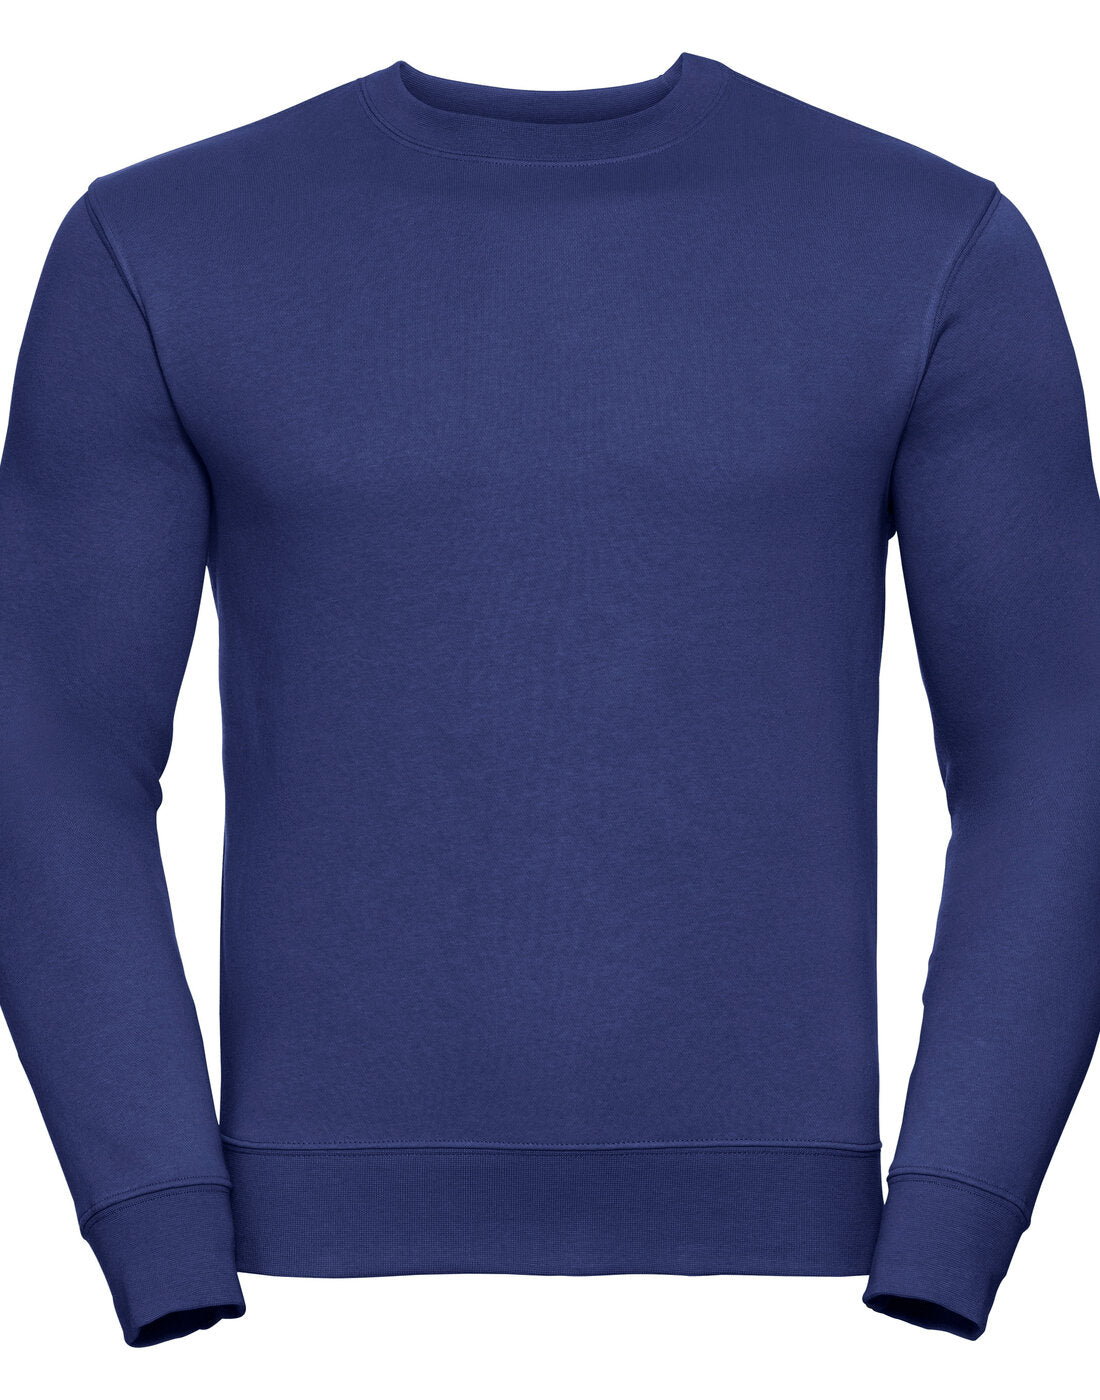 Russell Authentic Sweatshirt Bright Royal